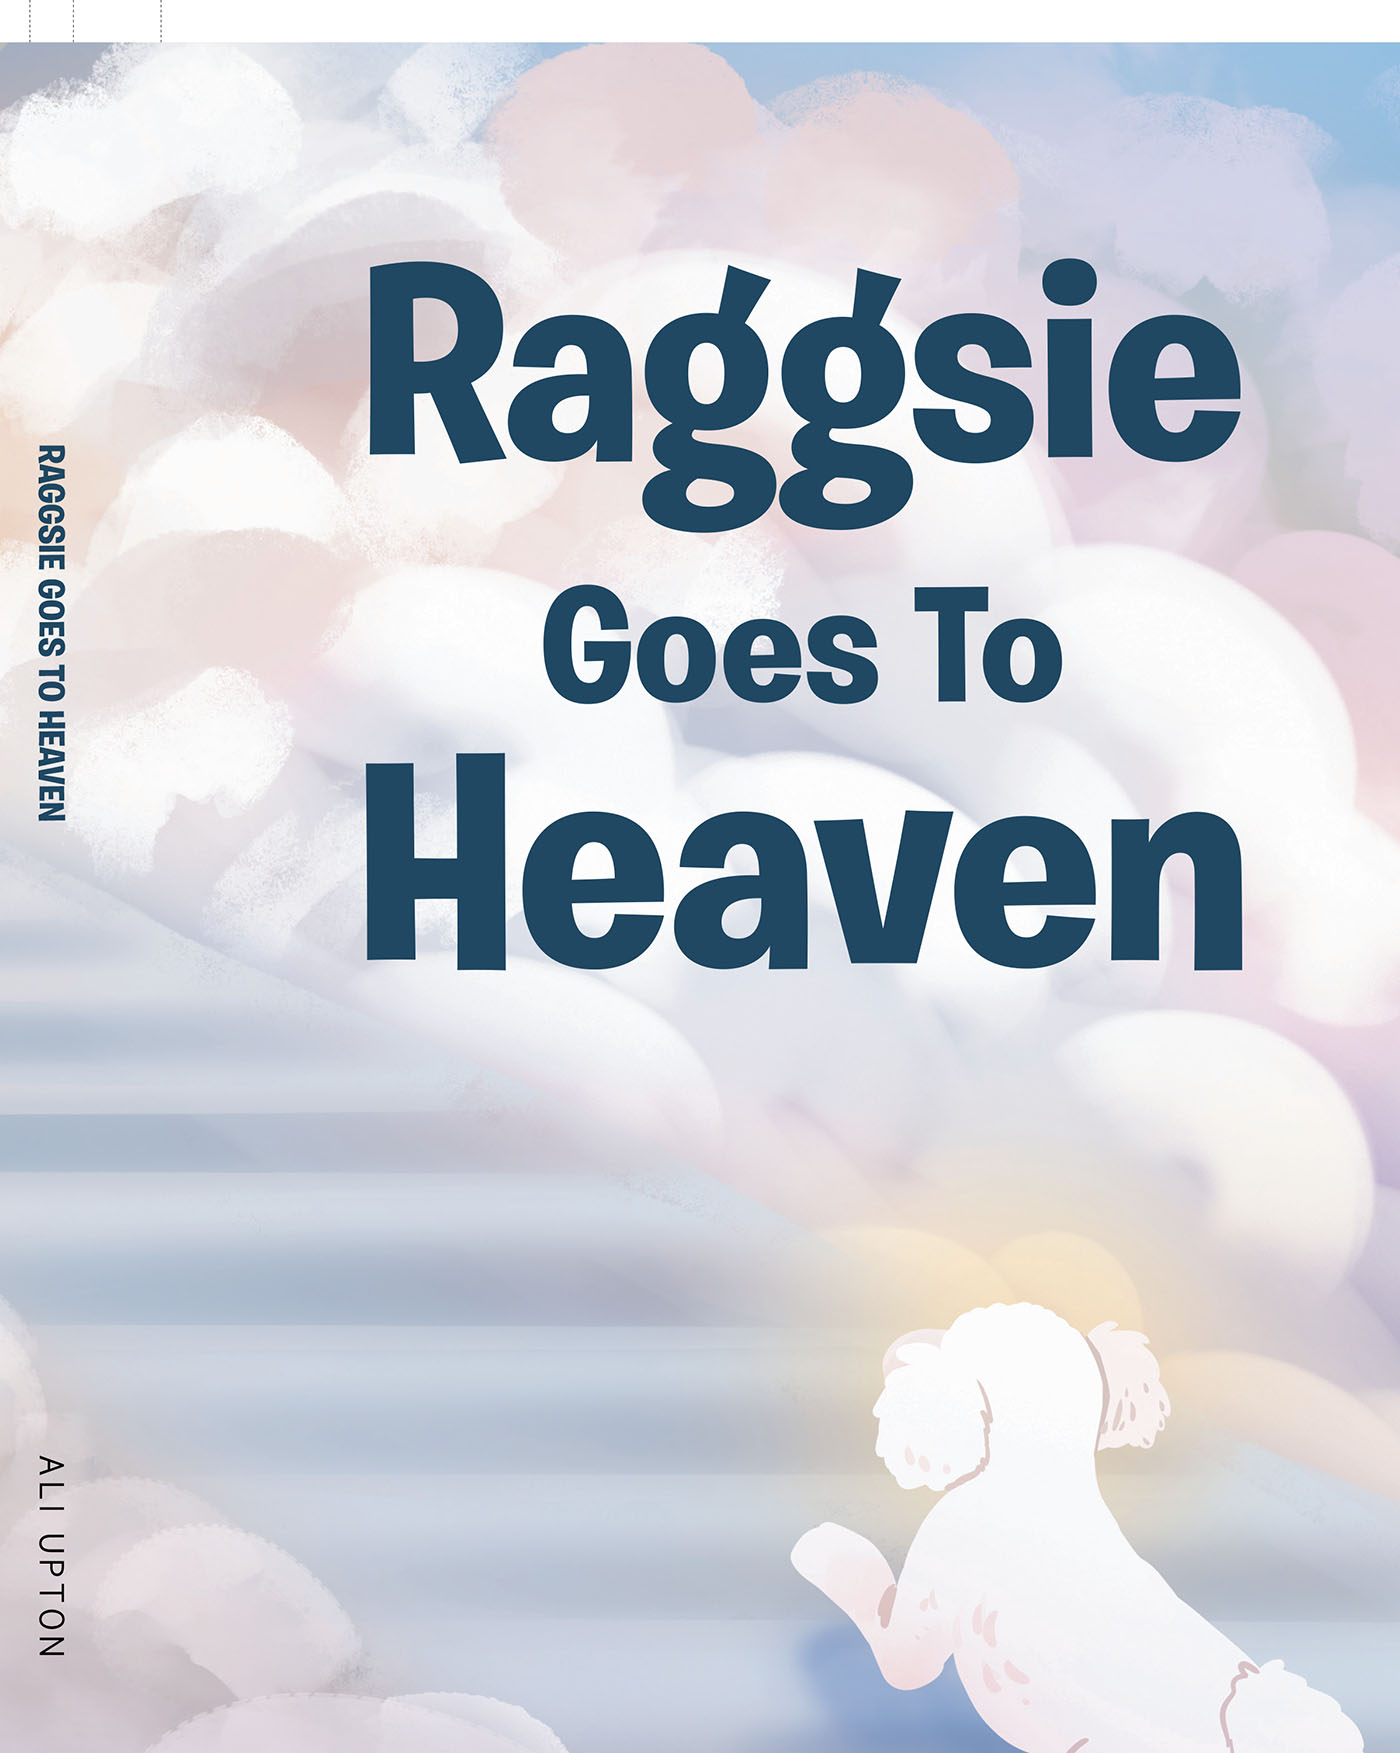 Author Ali Upton’s New Book, "Raggsie Goes to Heaven," Centers Around a Lovable Dog Names Raggsie Who Makes Her Final Adventure Towards Heaven After a Well-Lived Life